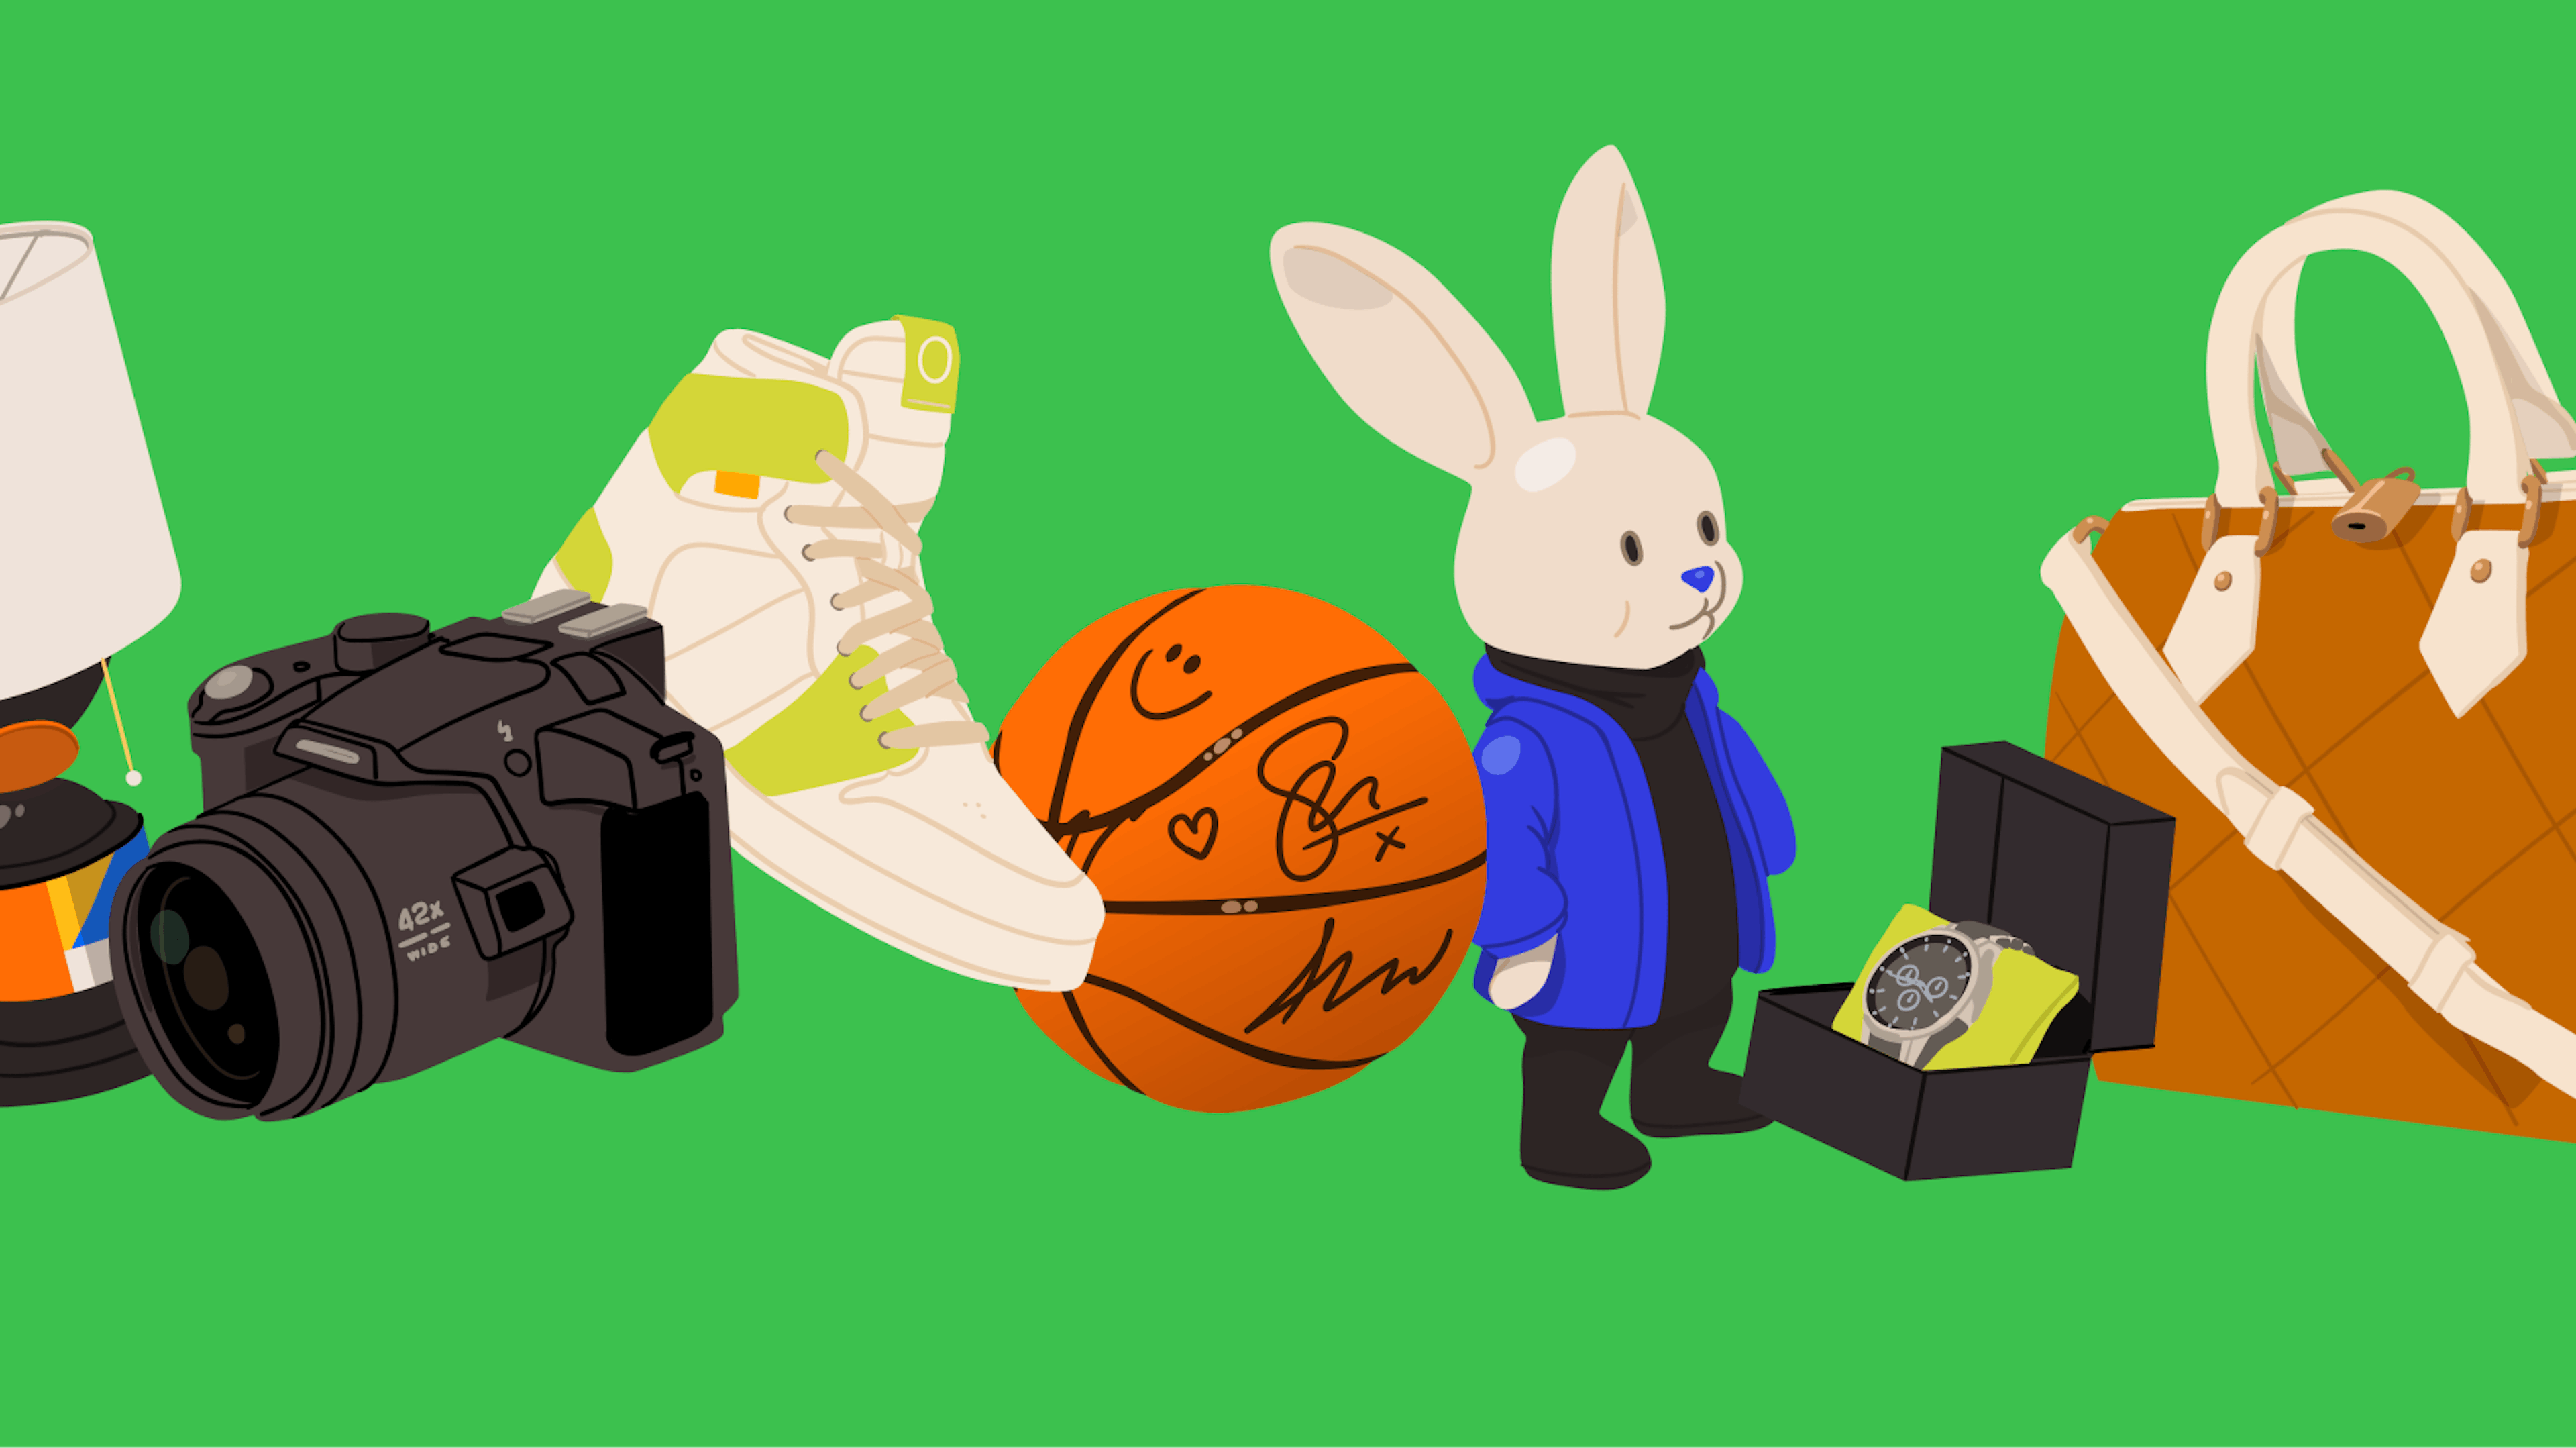 
Various items against a green background: a lamp, a camera, a pair of sneakers, an autographed basketball, a rabbit figurine, a wristwatch in a box, and a handbag.